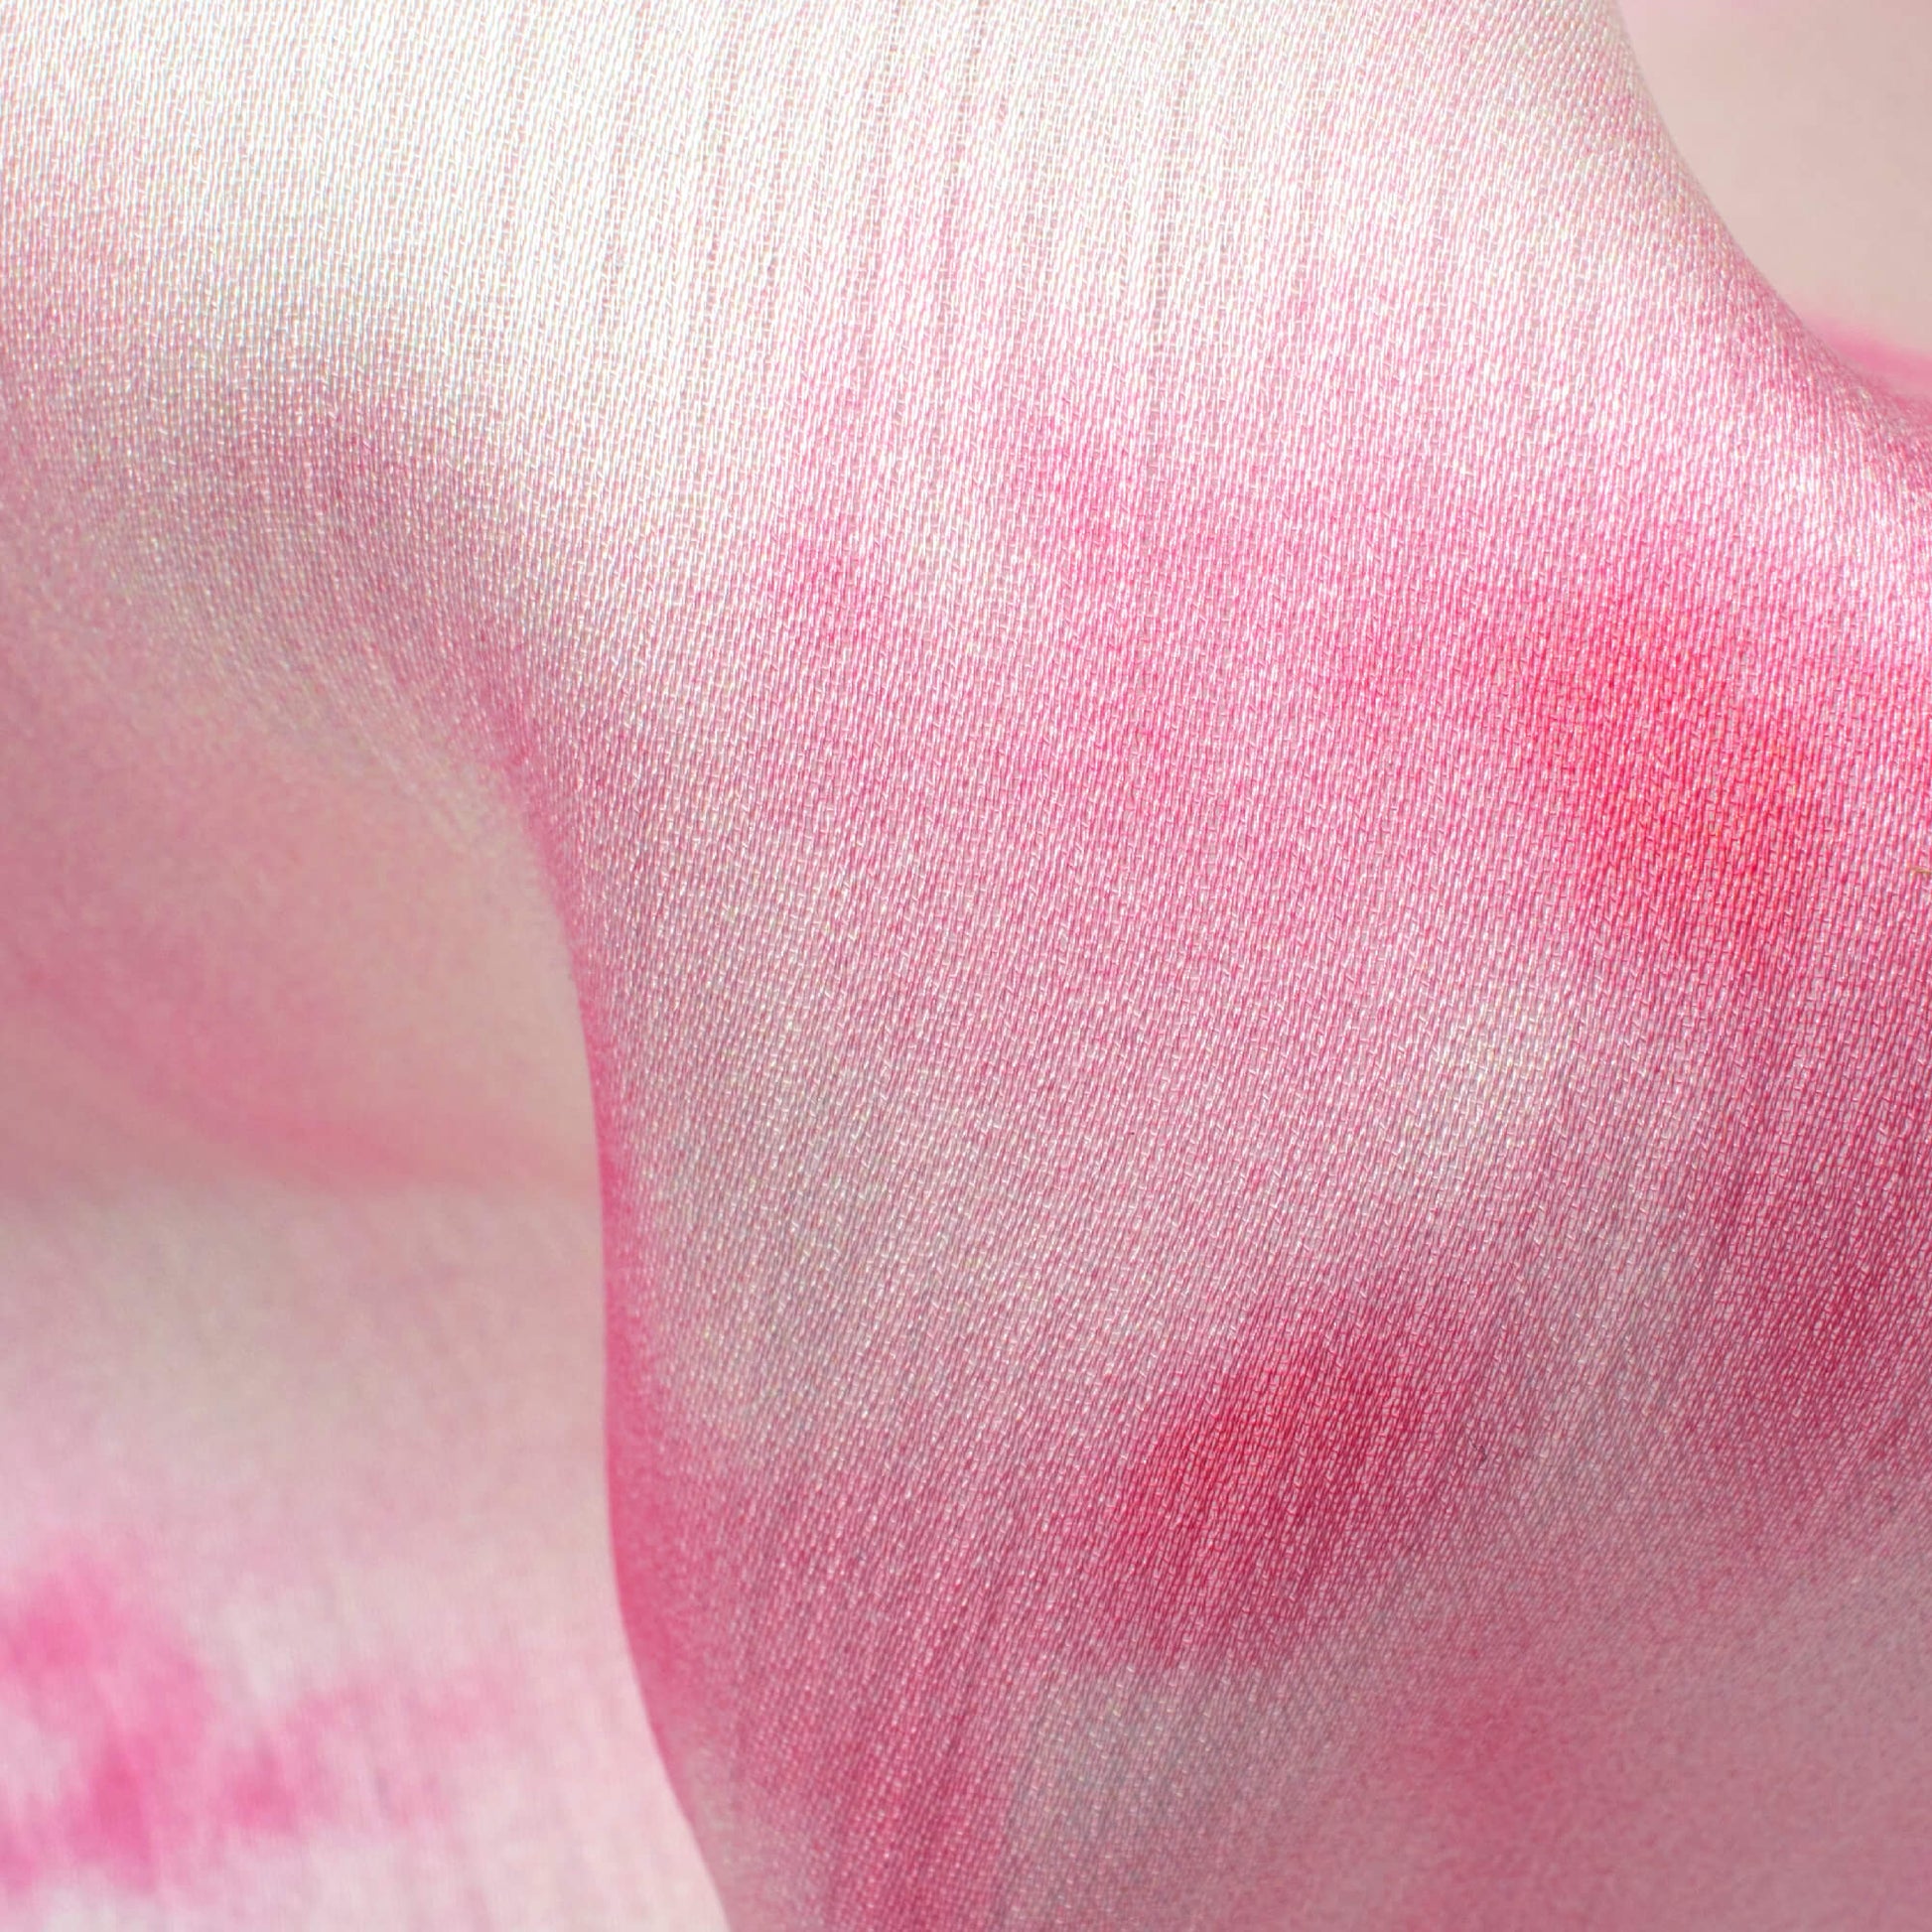 Off White And Pink Tie & Dye Pattern Digital Print Chiffon Satin Fabric - Fabcurate